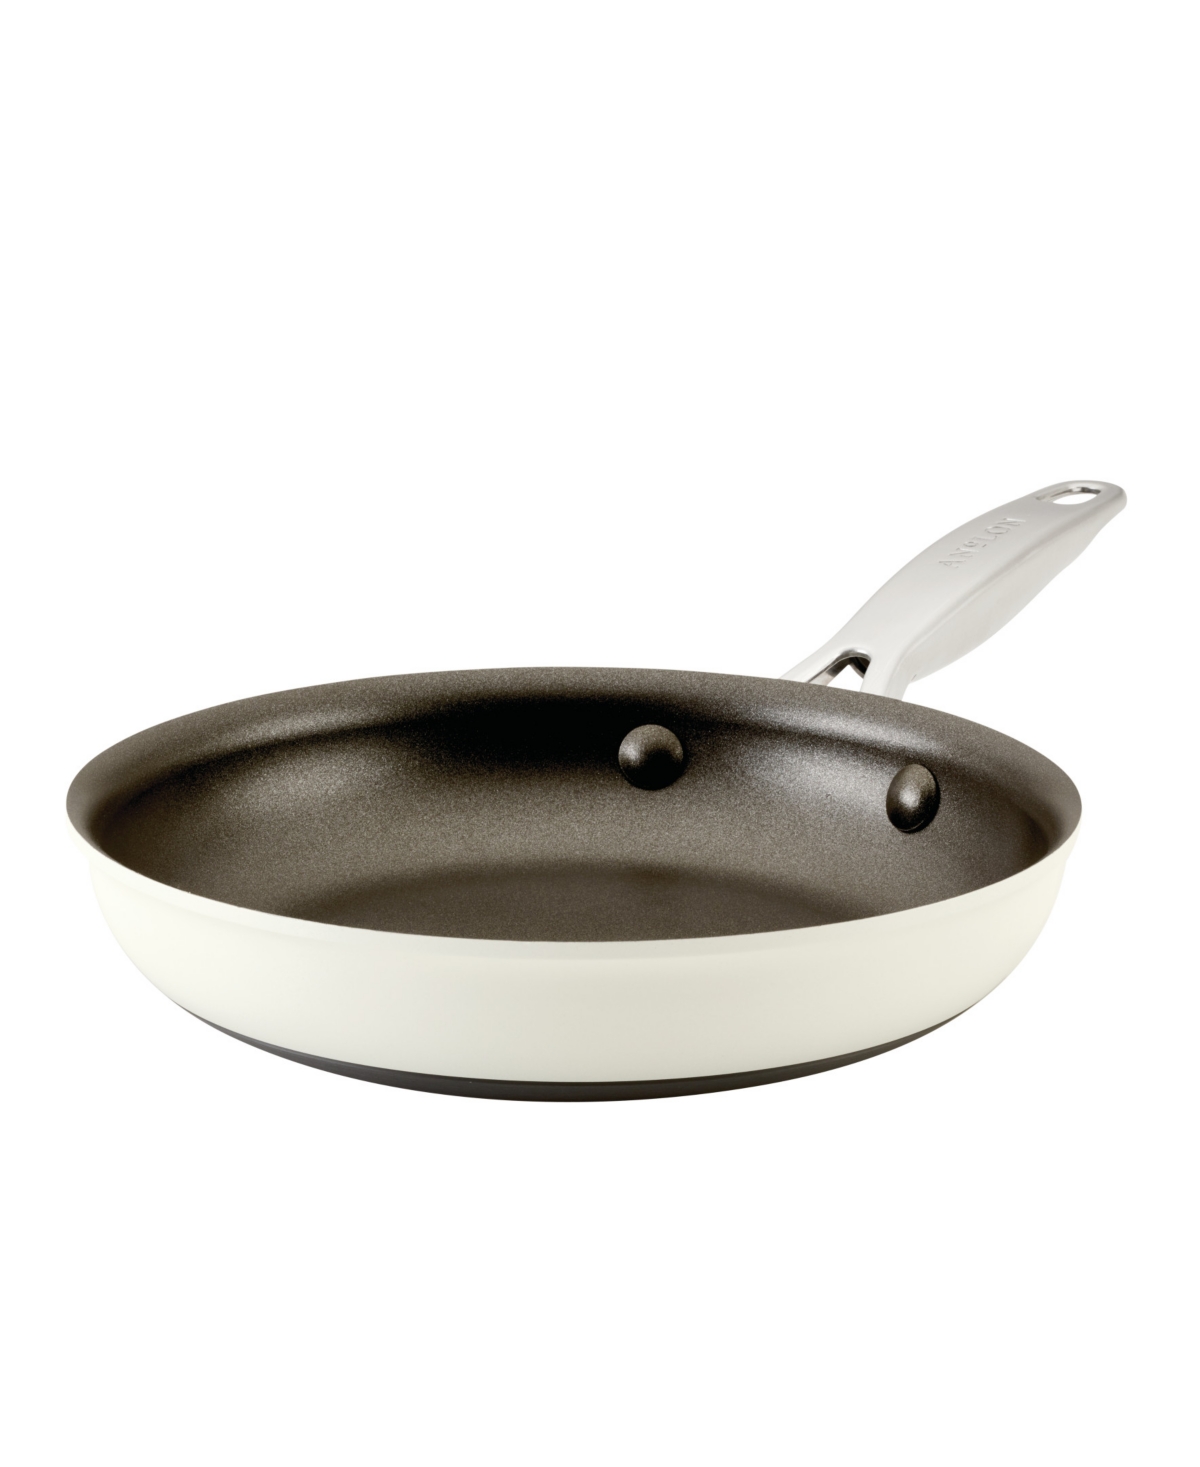 Shop Anolon Achieve Hard Anodized Nonstick 8.25" Frying Pan In Cream